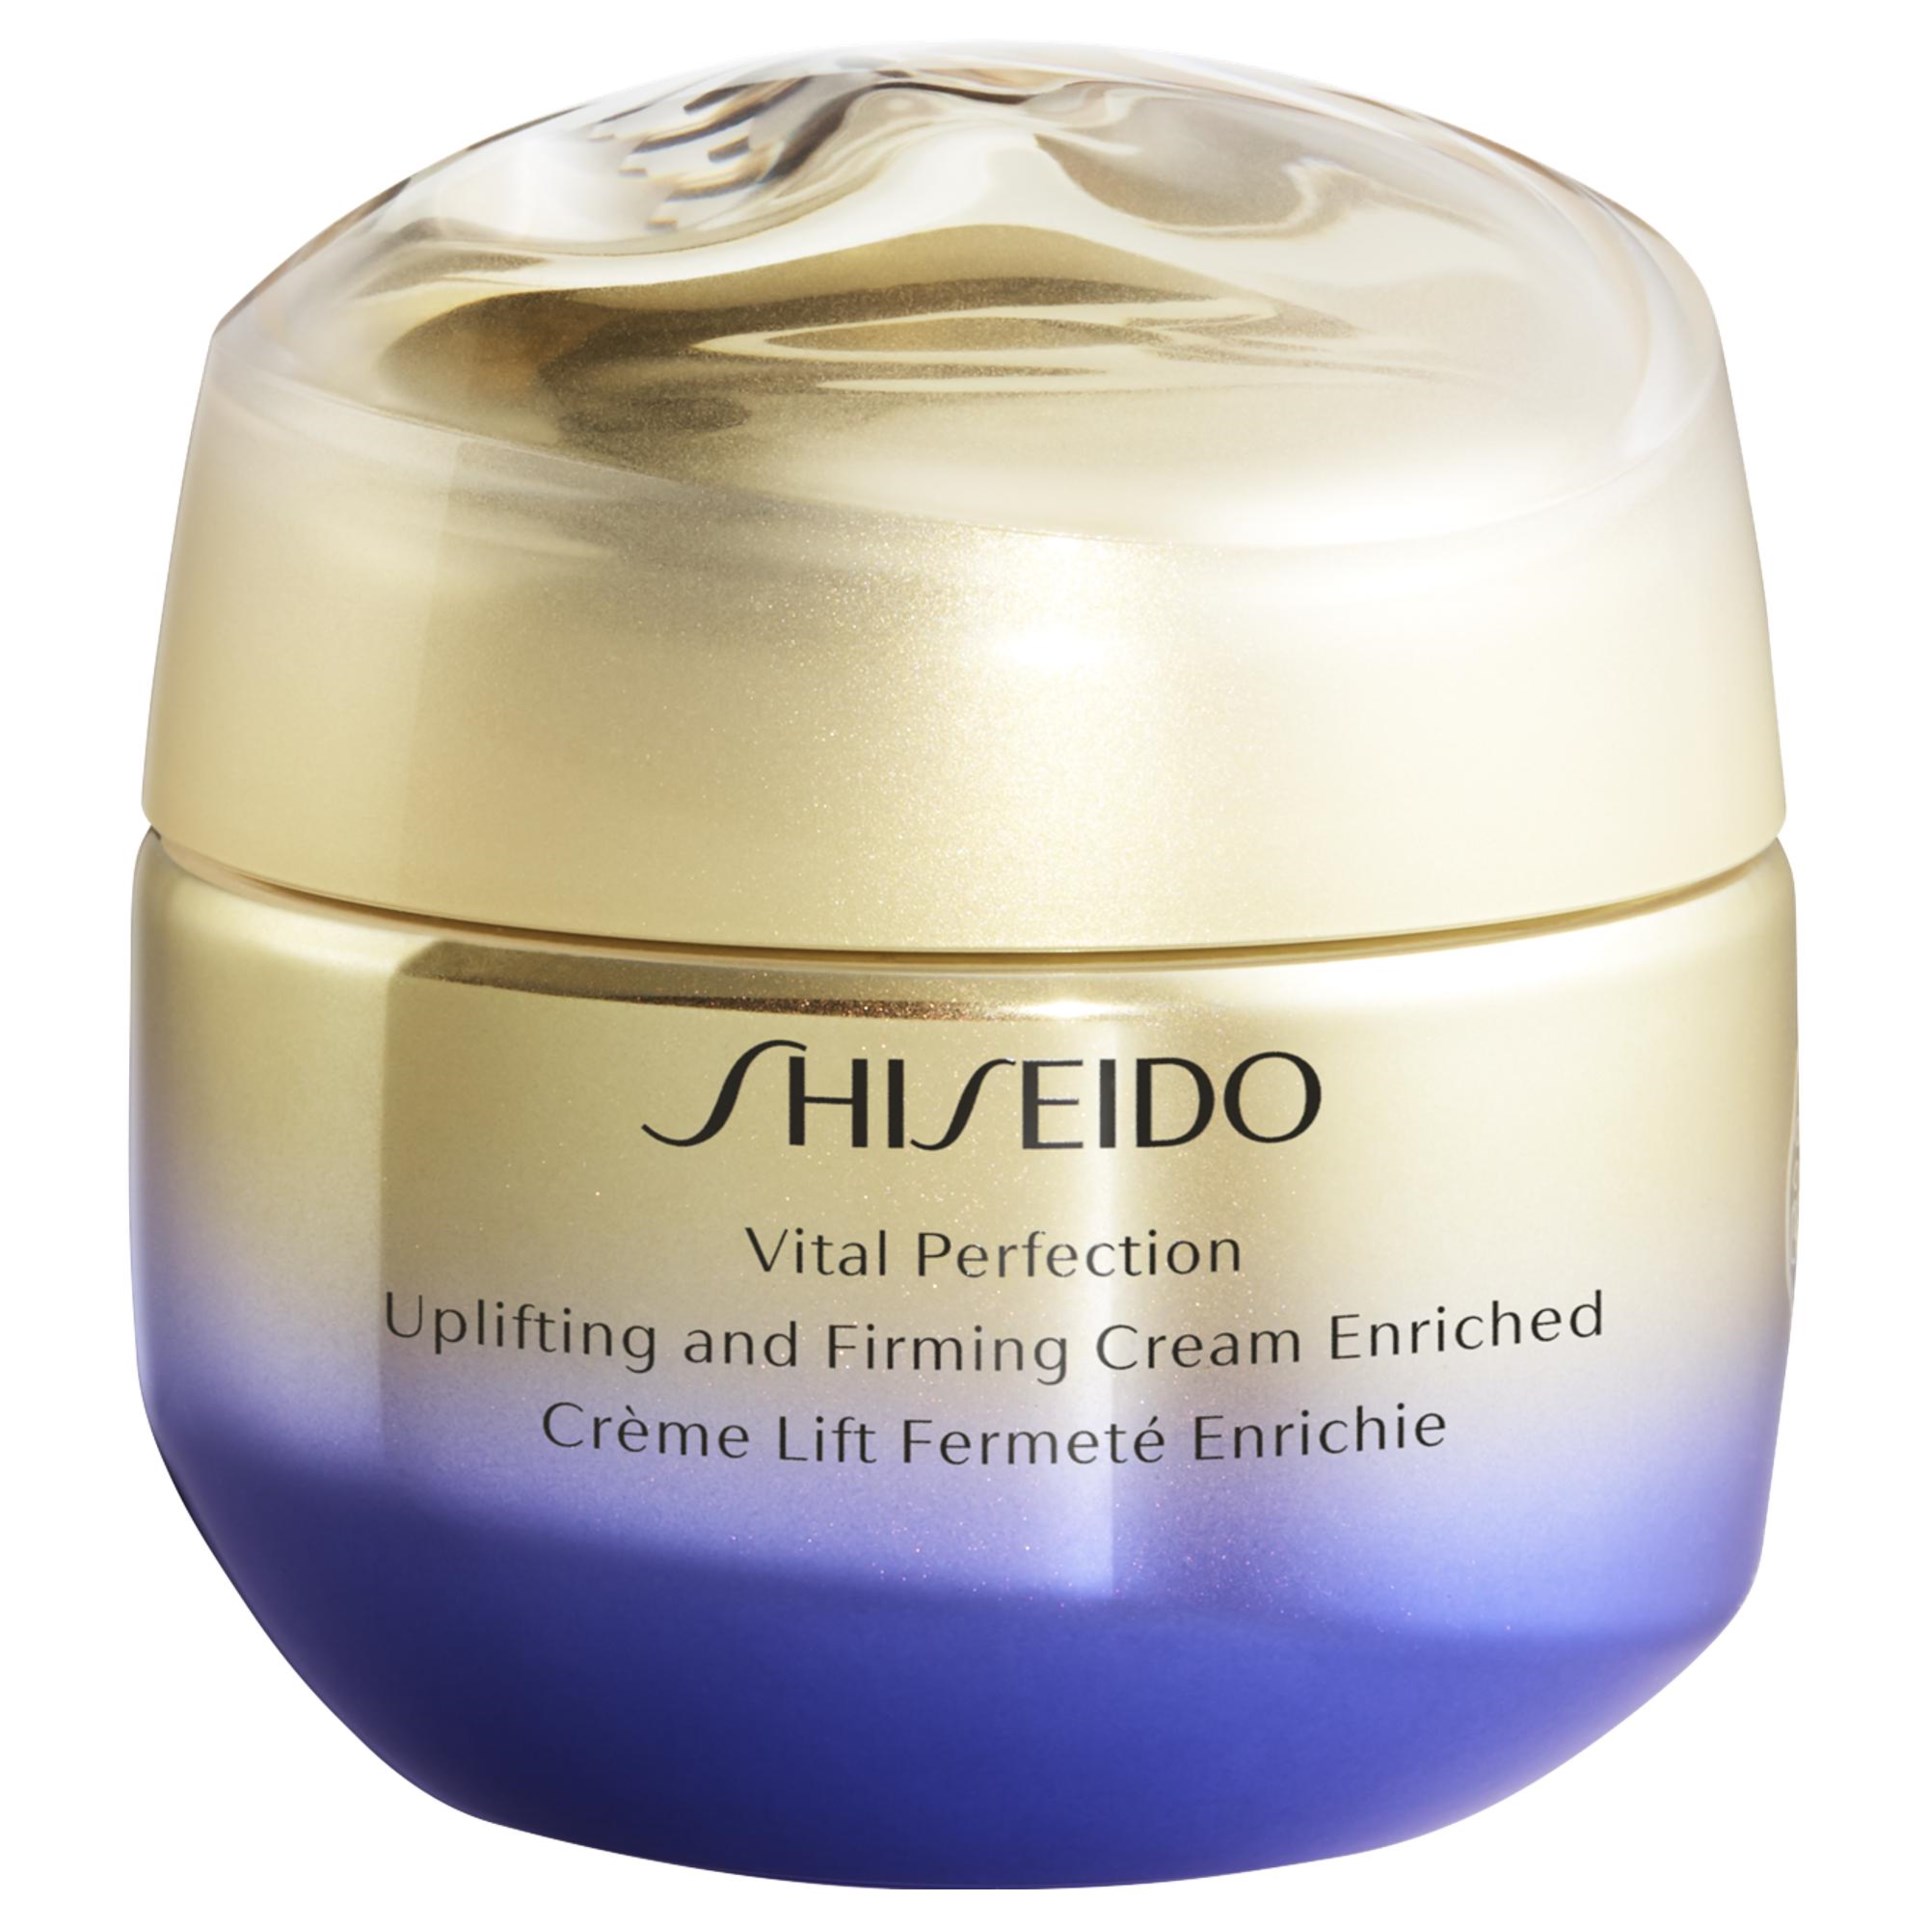 Läs mer om Shiseido Vital Perfection Uplifting and firm enriched cream